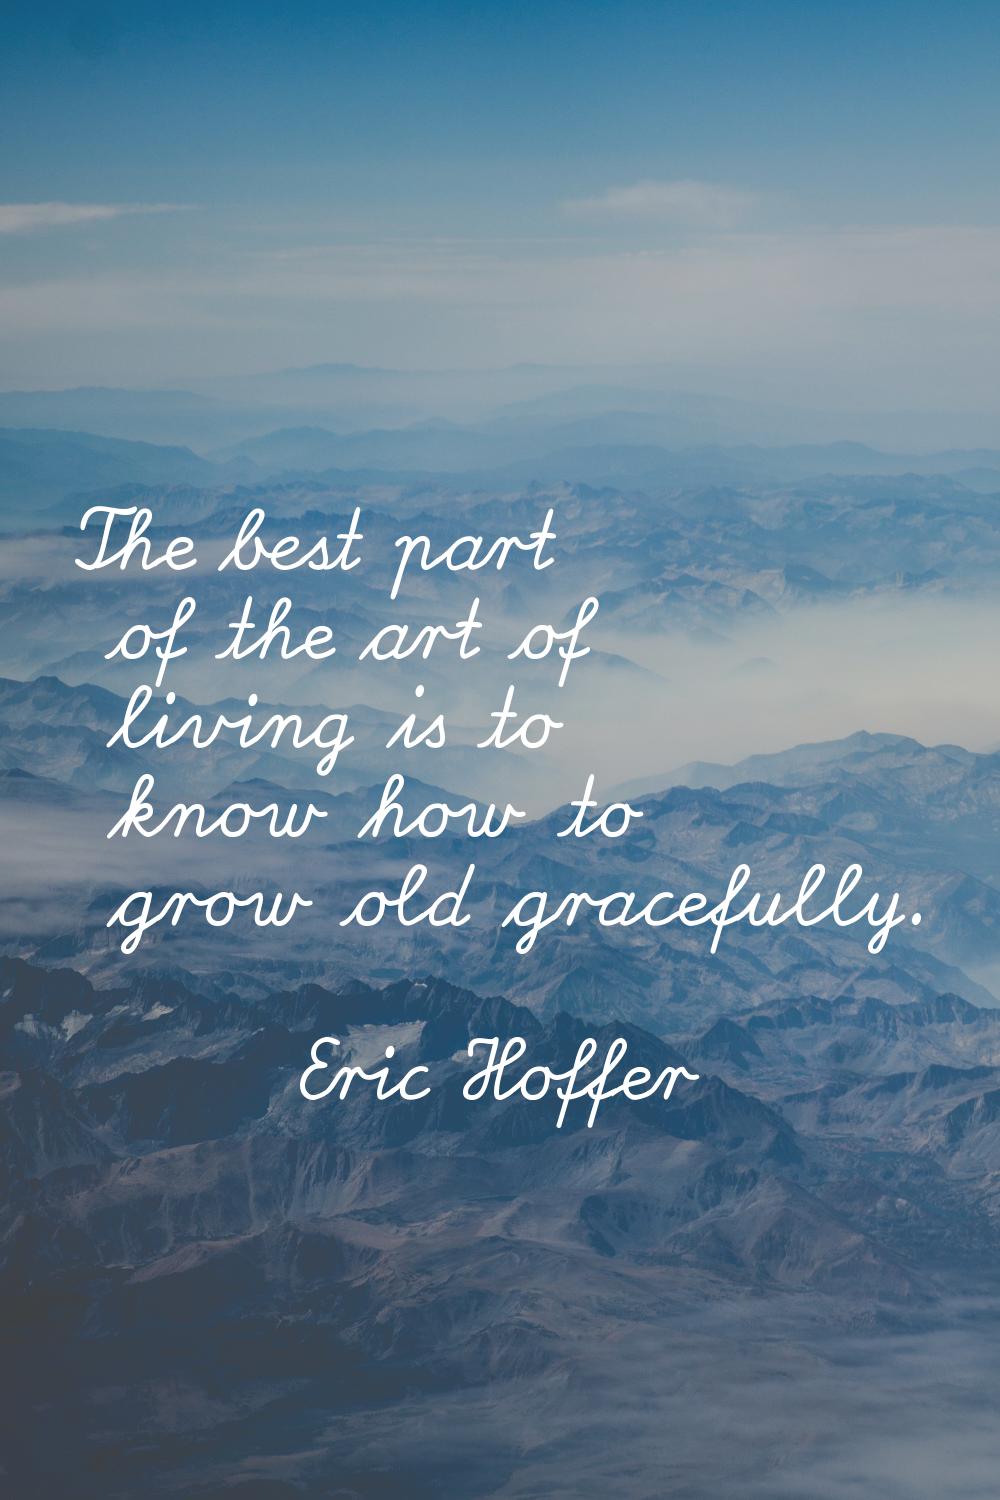 The best part of the art of living is to know how to grow old gracefully.